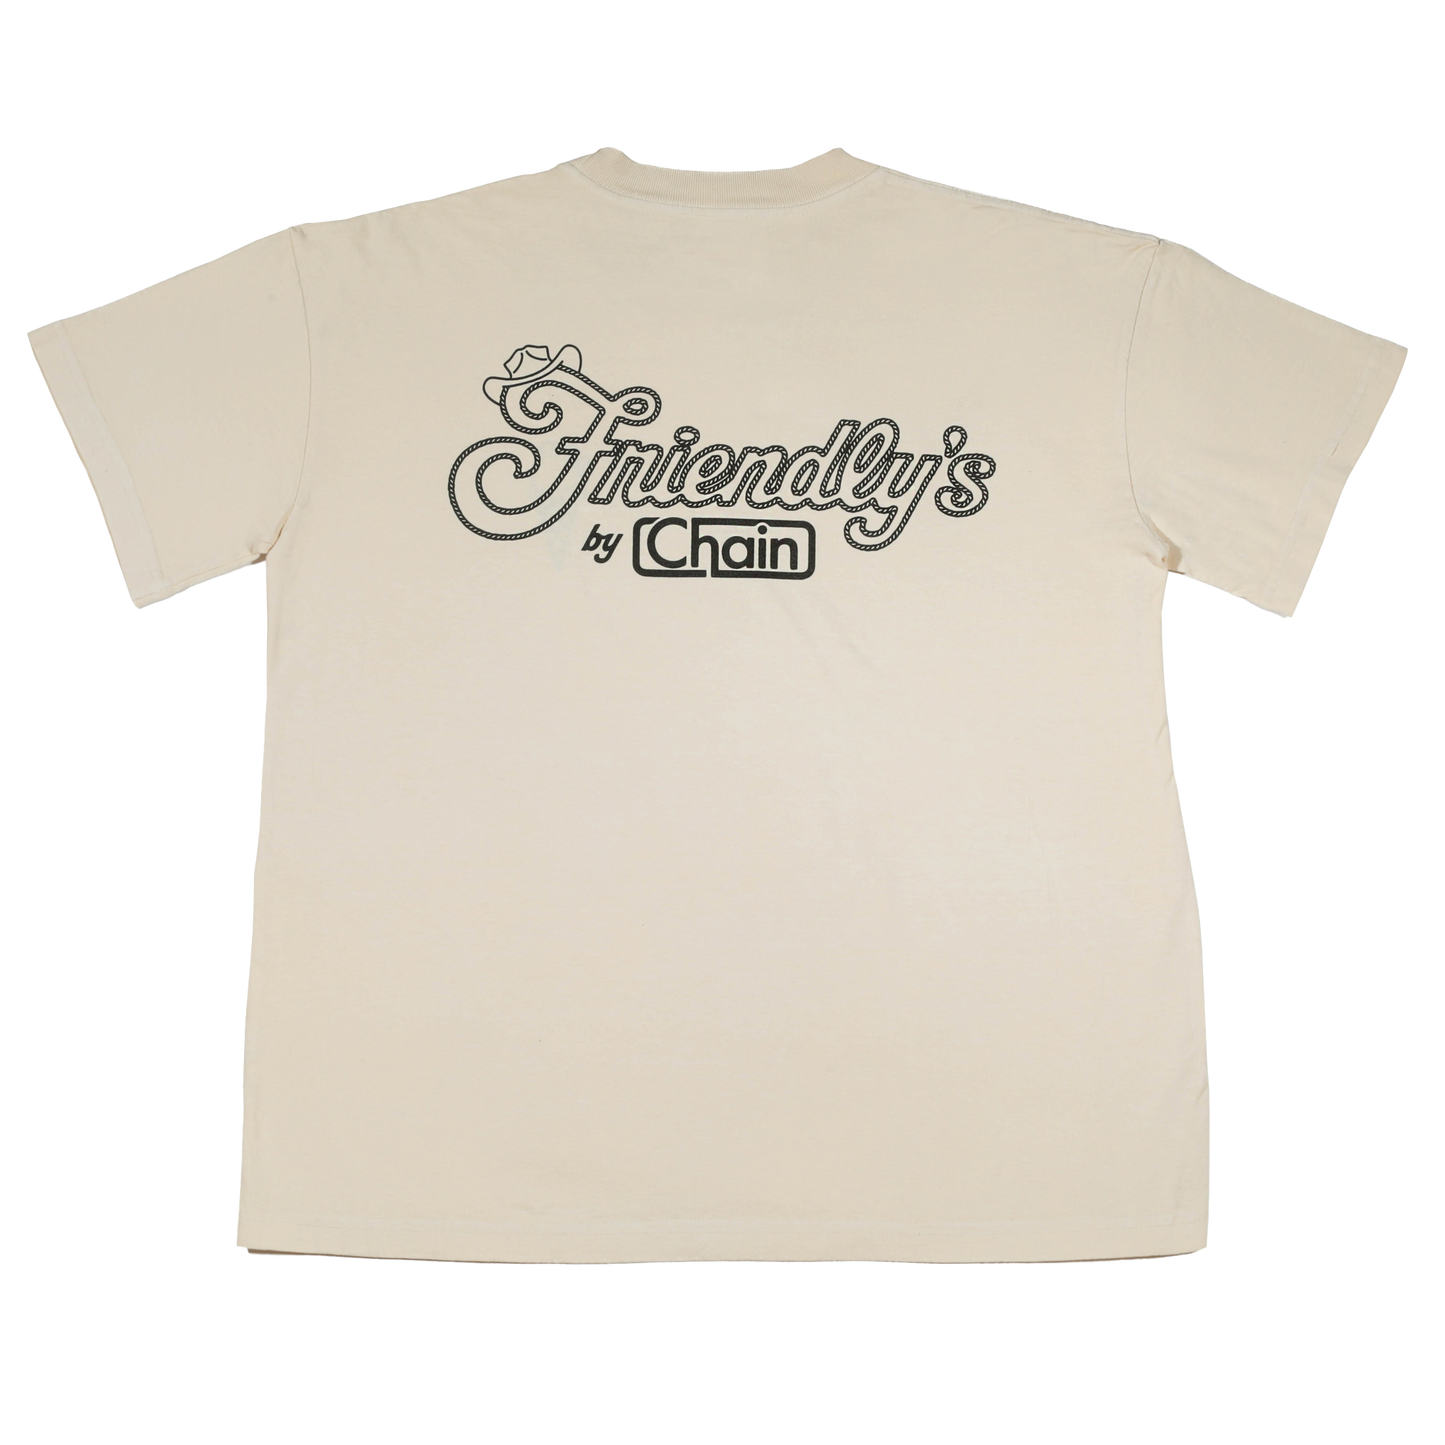 The Western Friendly's Tee